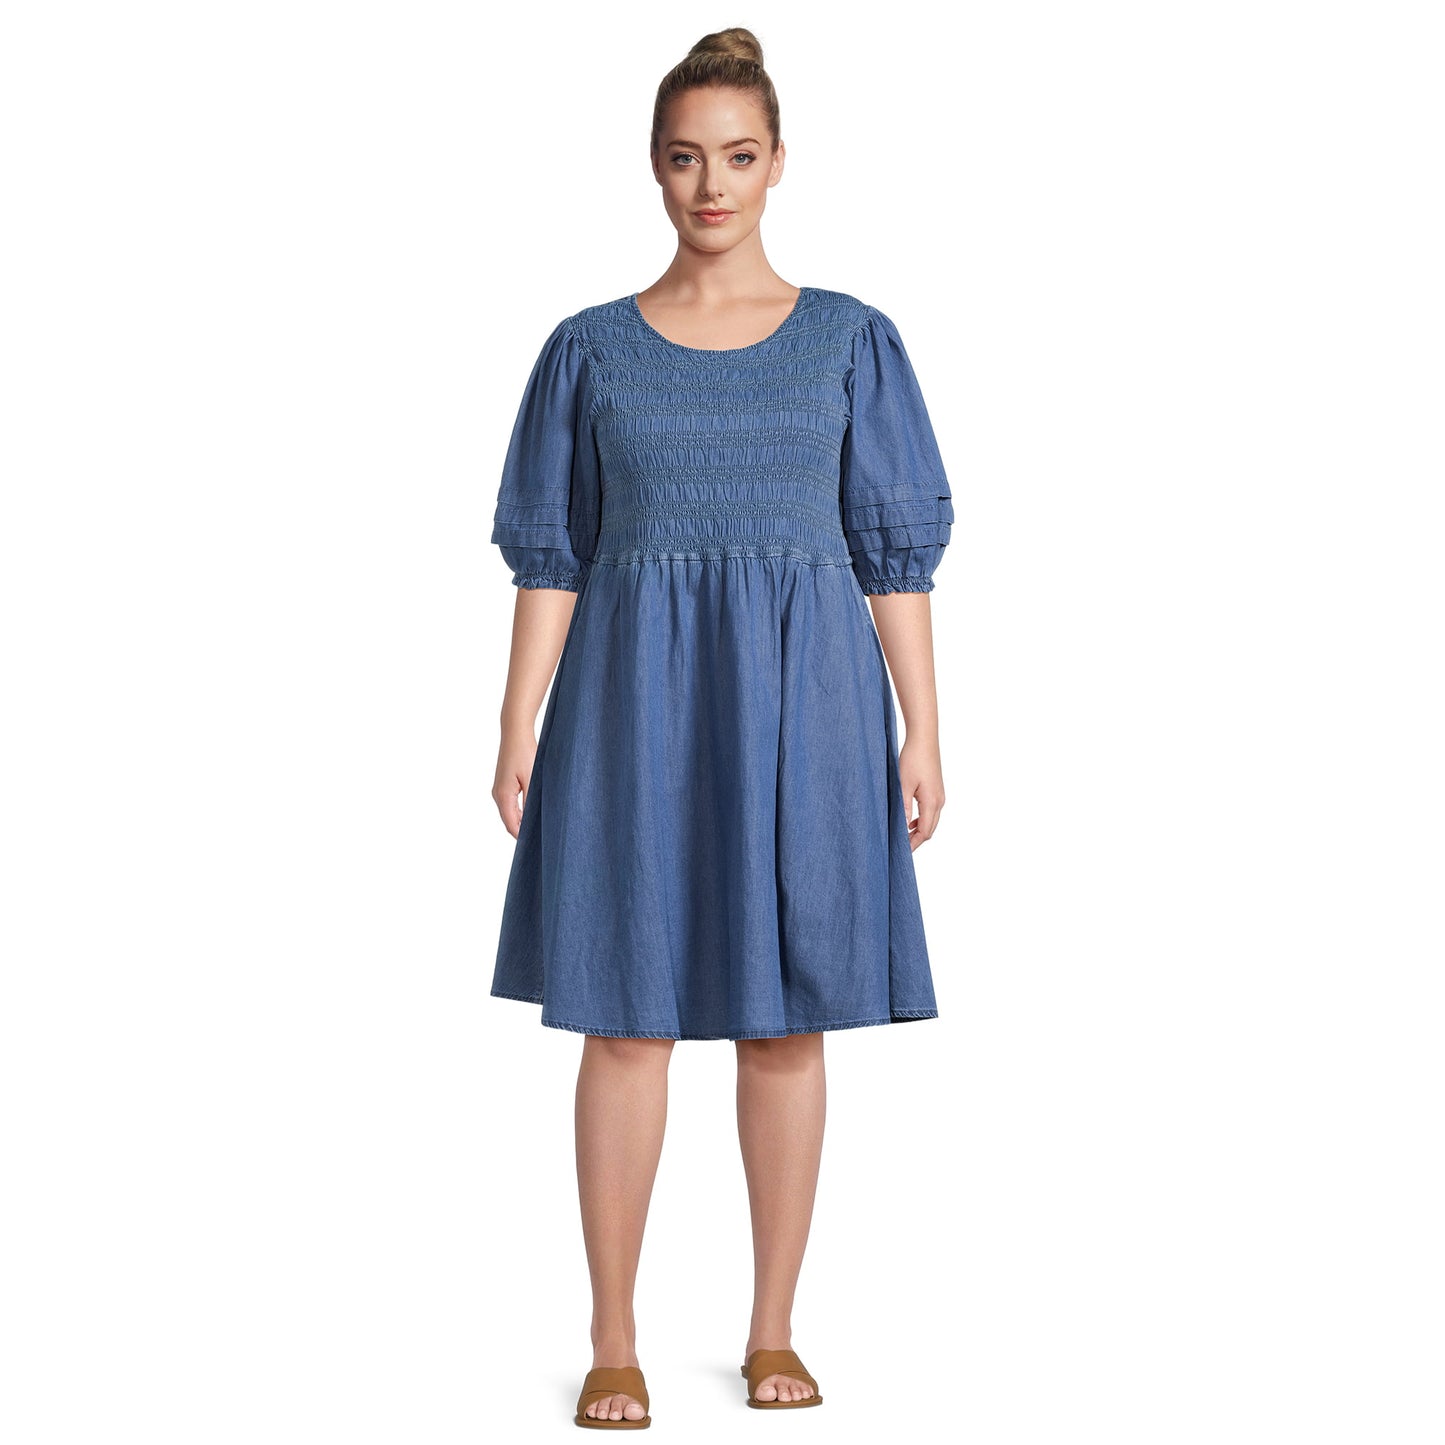 Terra & Sky Women's Plus Smocked Dress with Puff Sleeves